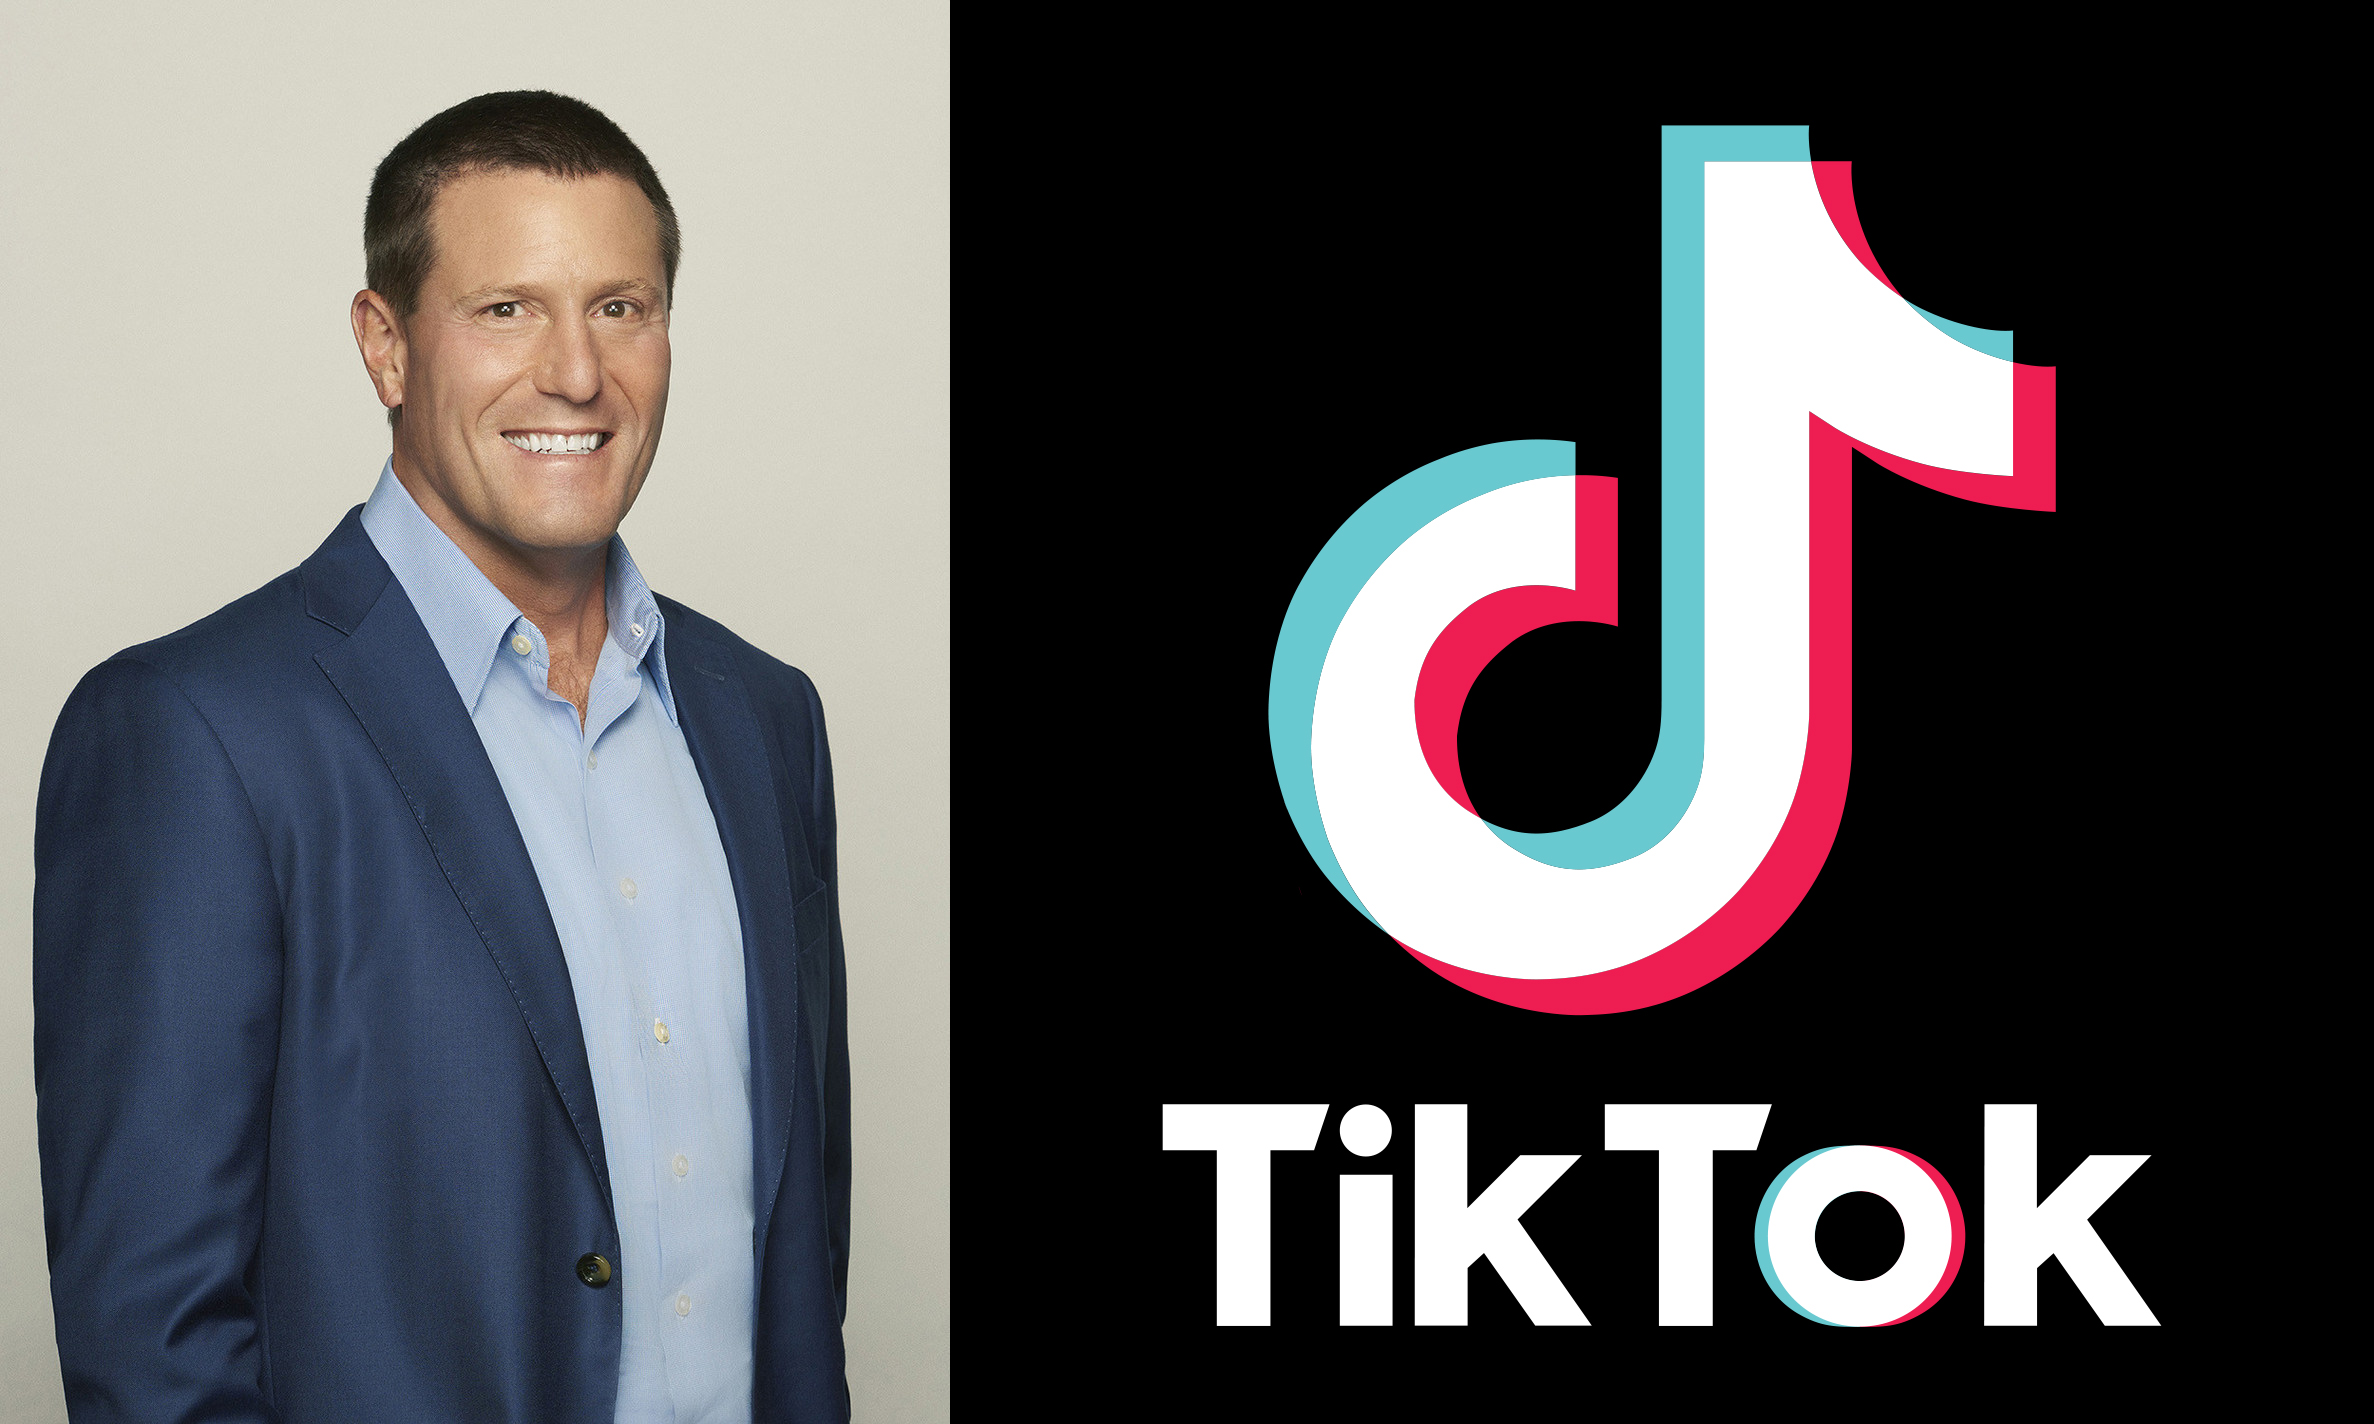 TikTok CEO Kevin Mayer resigns just three months after joining the company